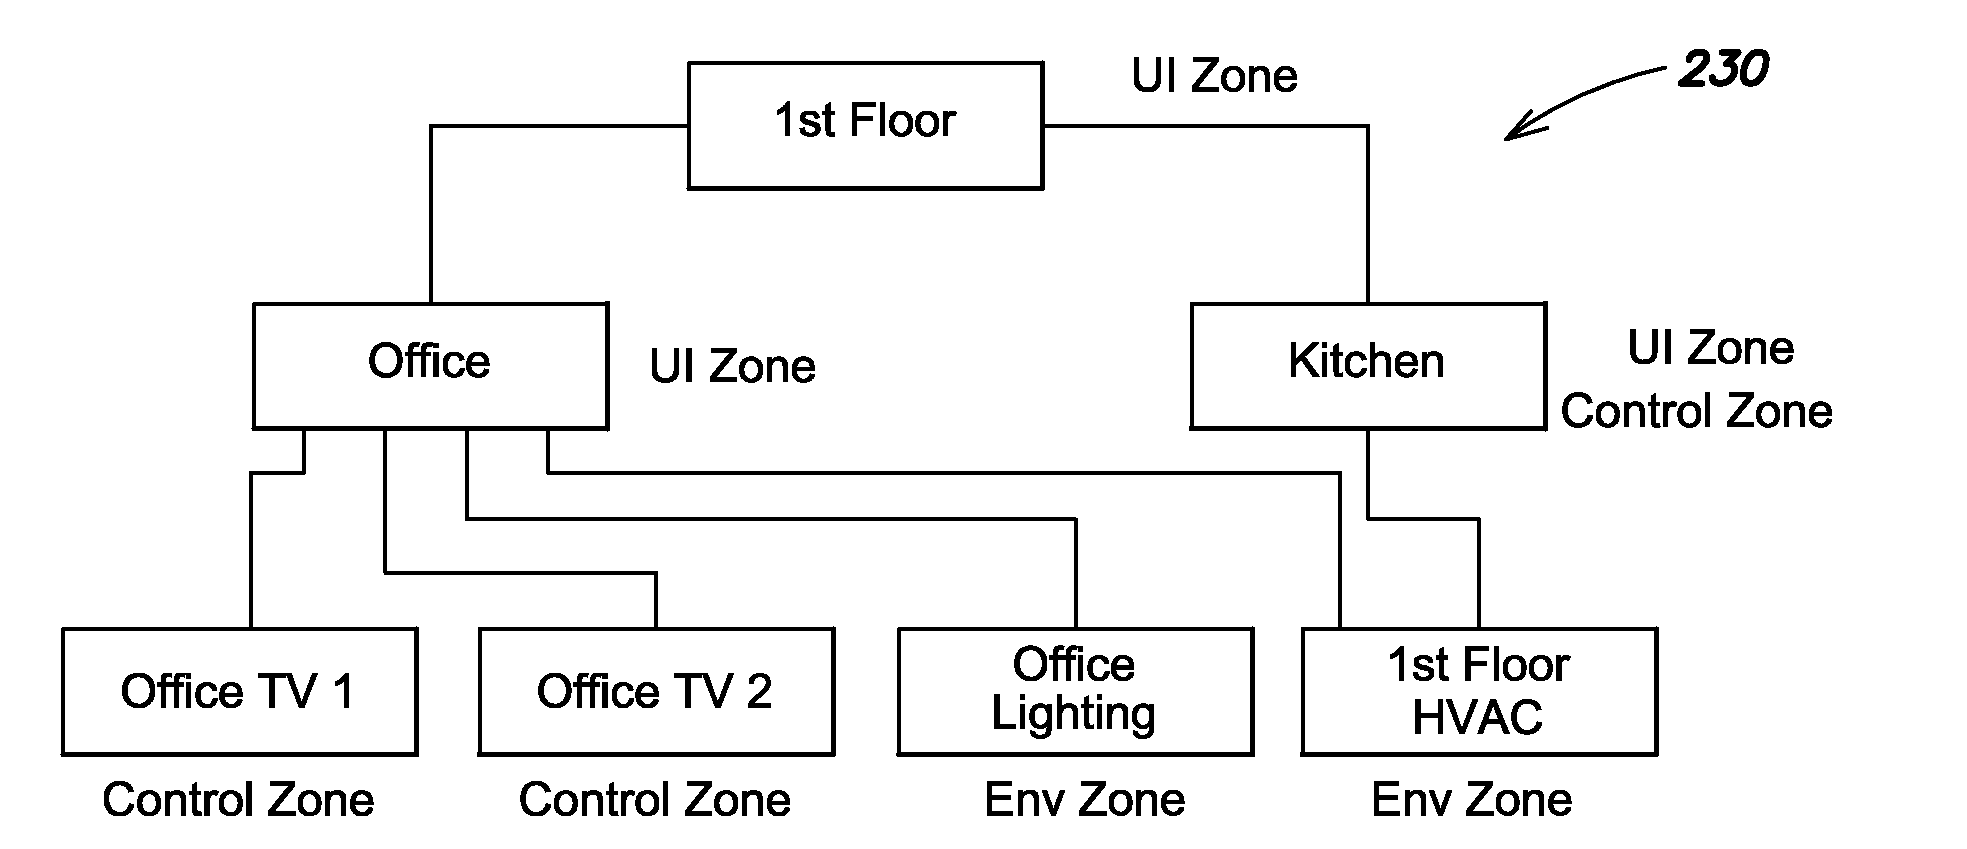 Automatic configuration of control device user interface in a home automation system